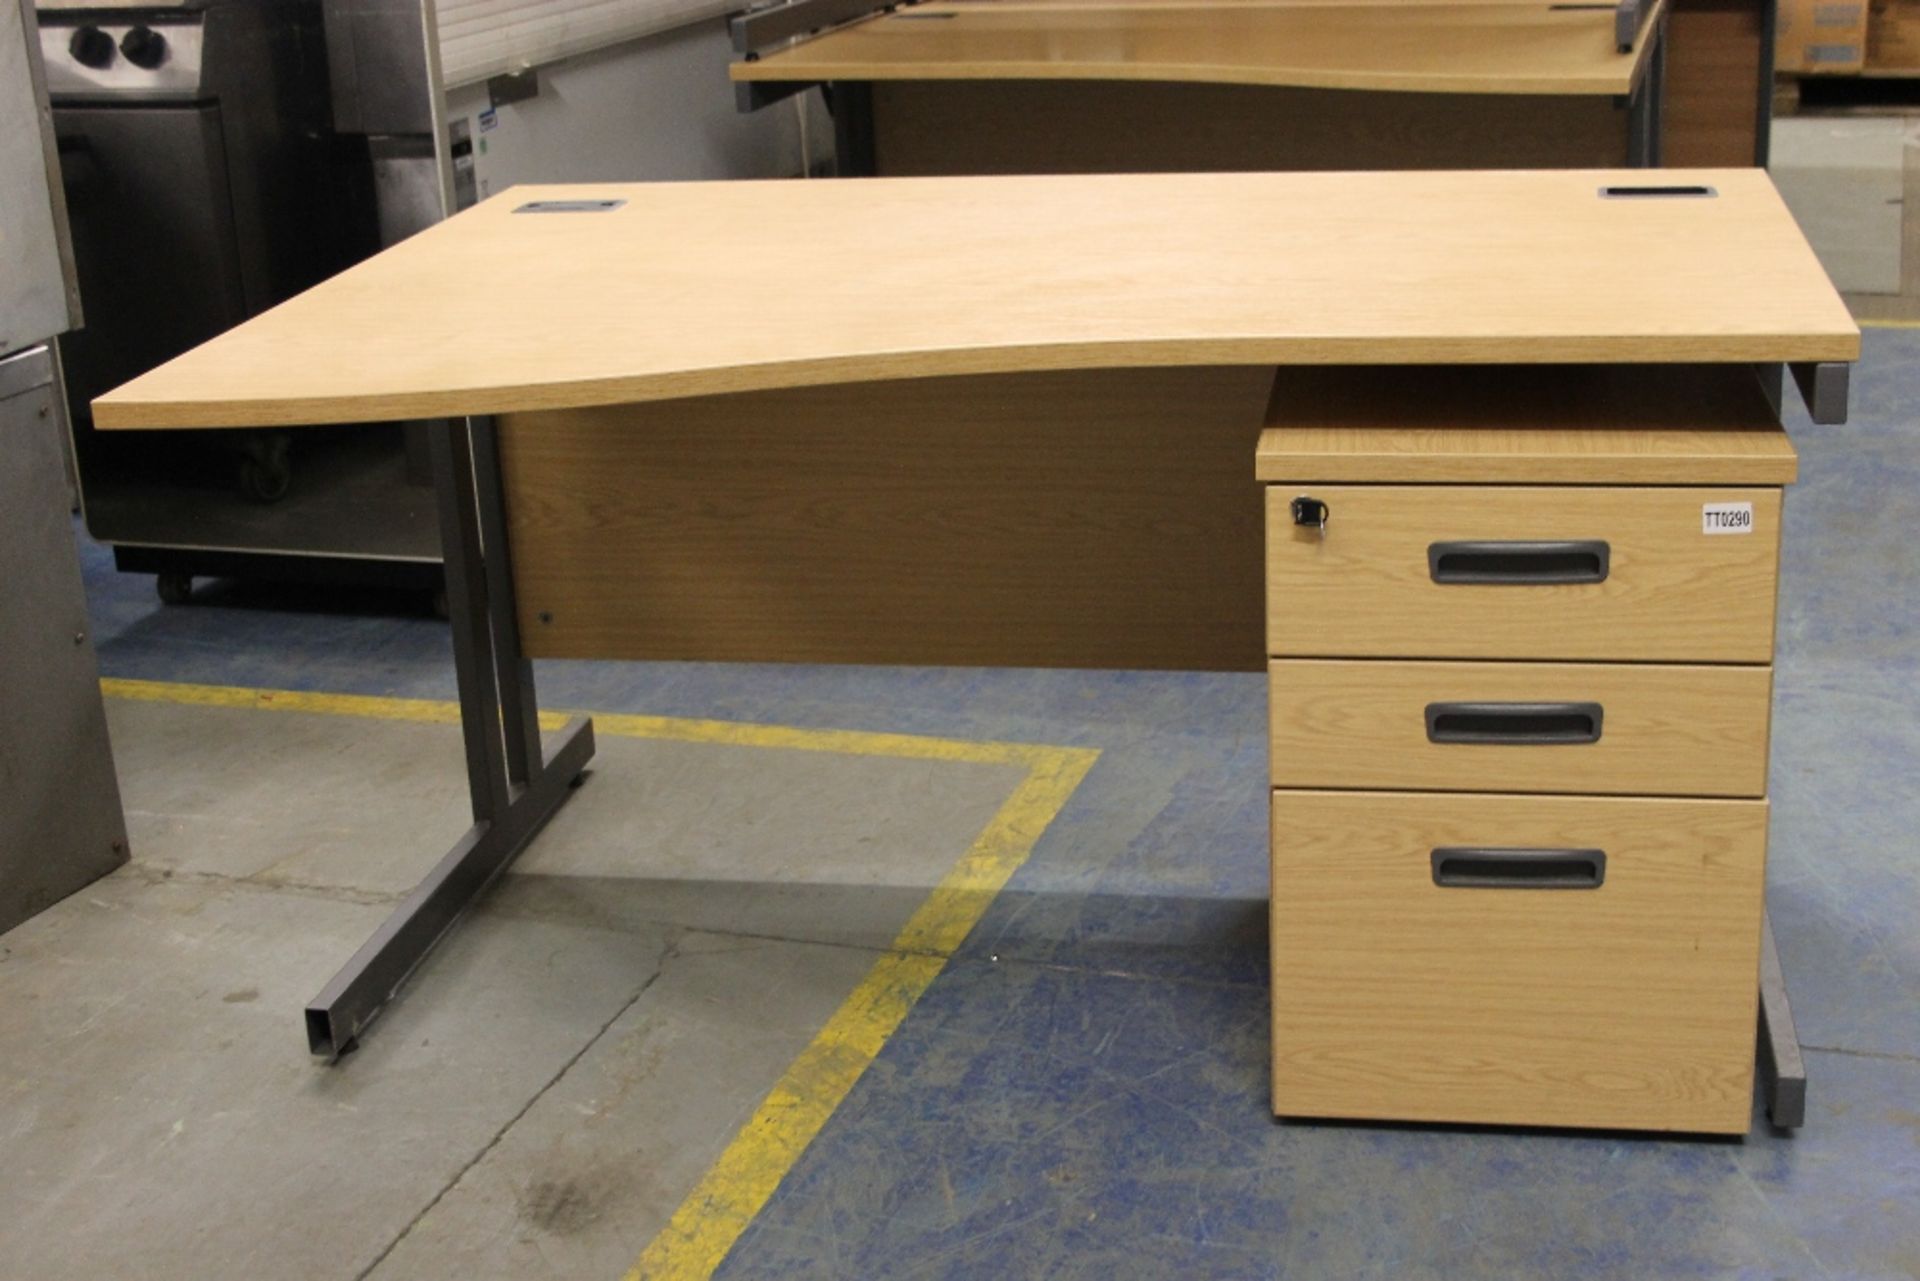 Matching Office Set in Light Wood Office Desk + Set 3 Drawers – Nice condition W140cm x H80cm x